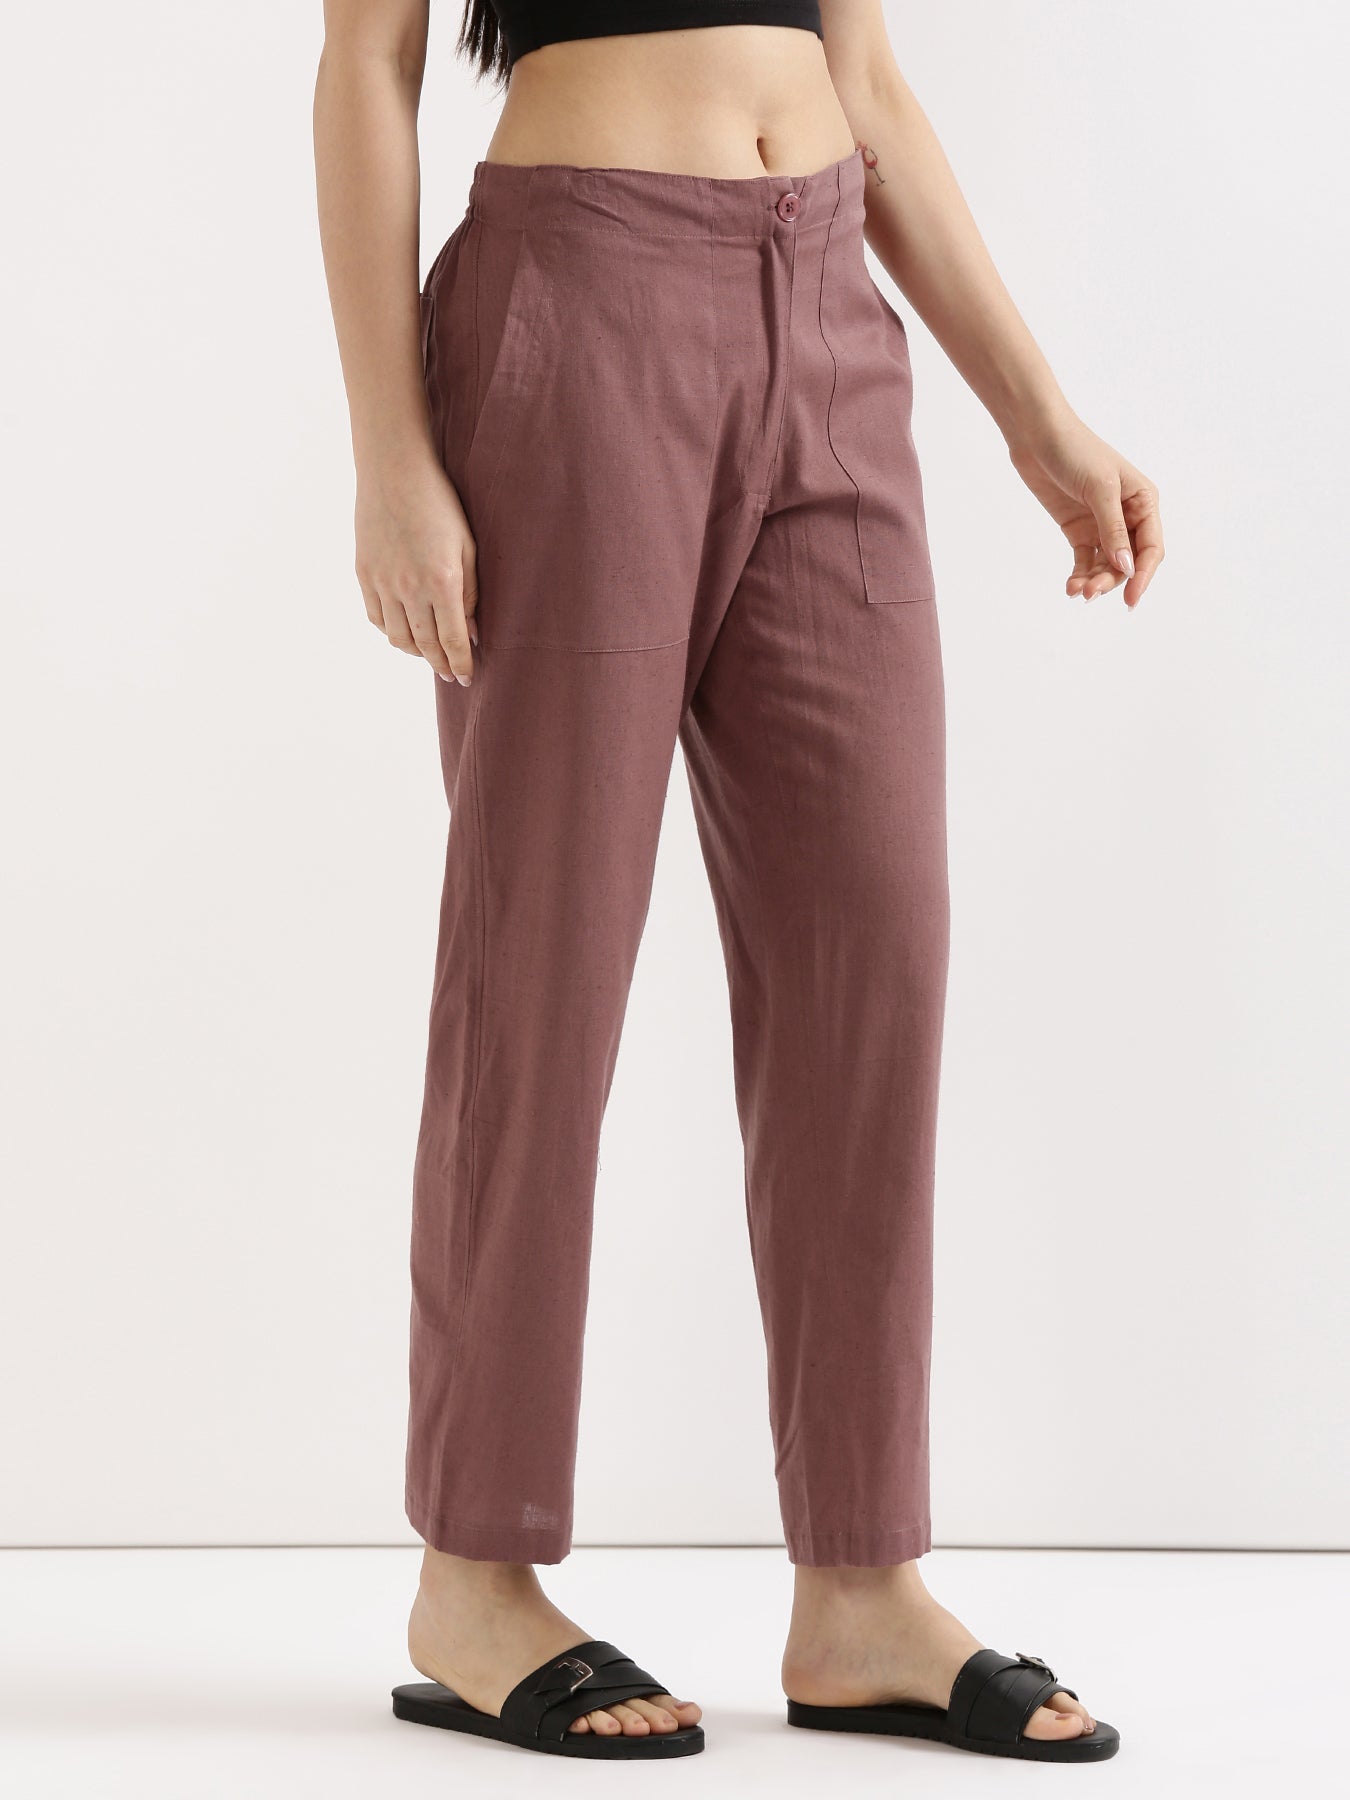 Rose Taupe Airy Linen Pants